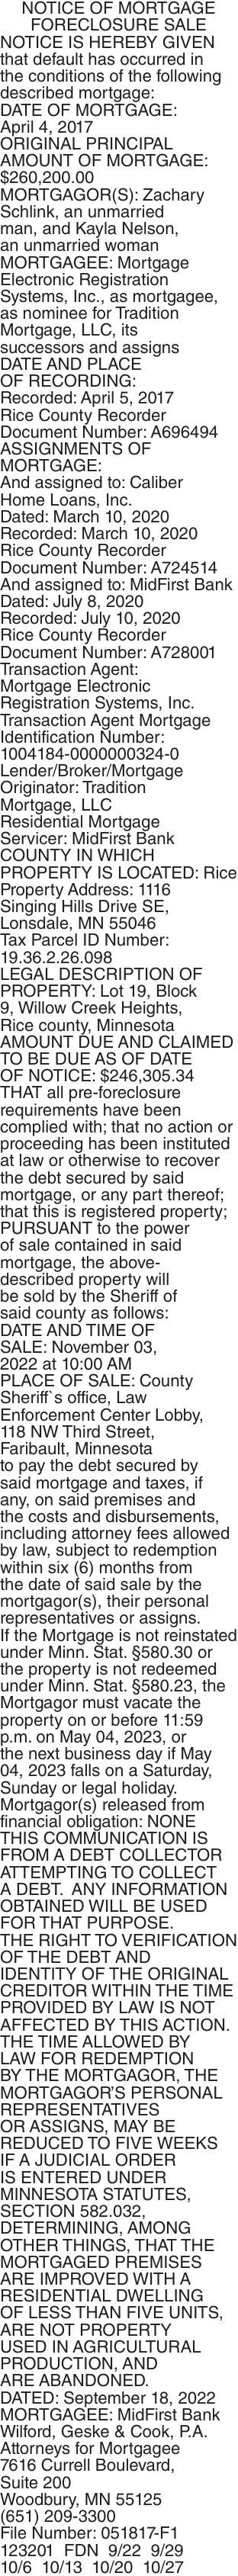 NOTICE OF MORTGAGE FORECLOSURE SALE